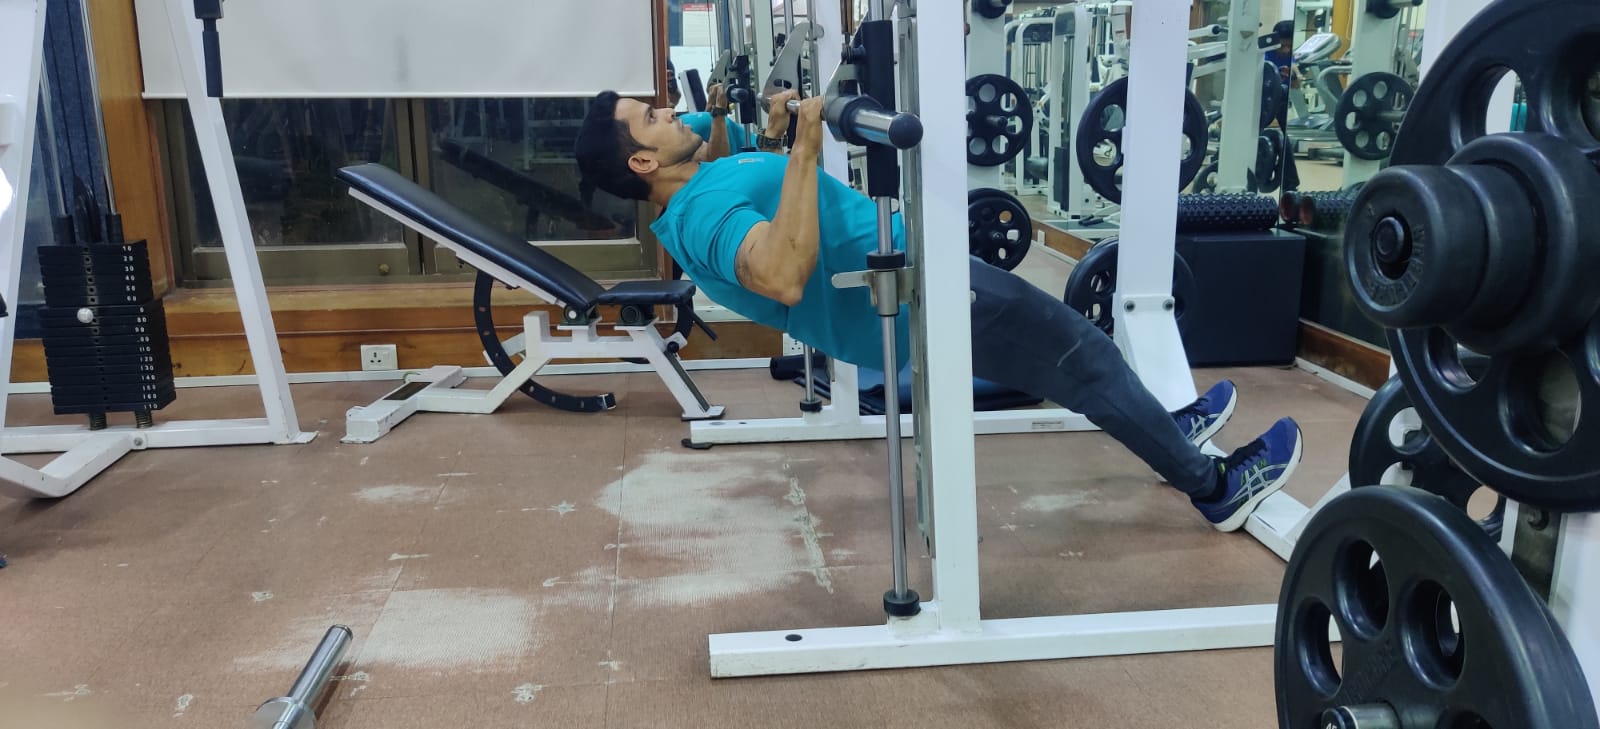 Tips to Improve Your Bench Press  EREPS the European Register of